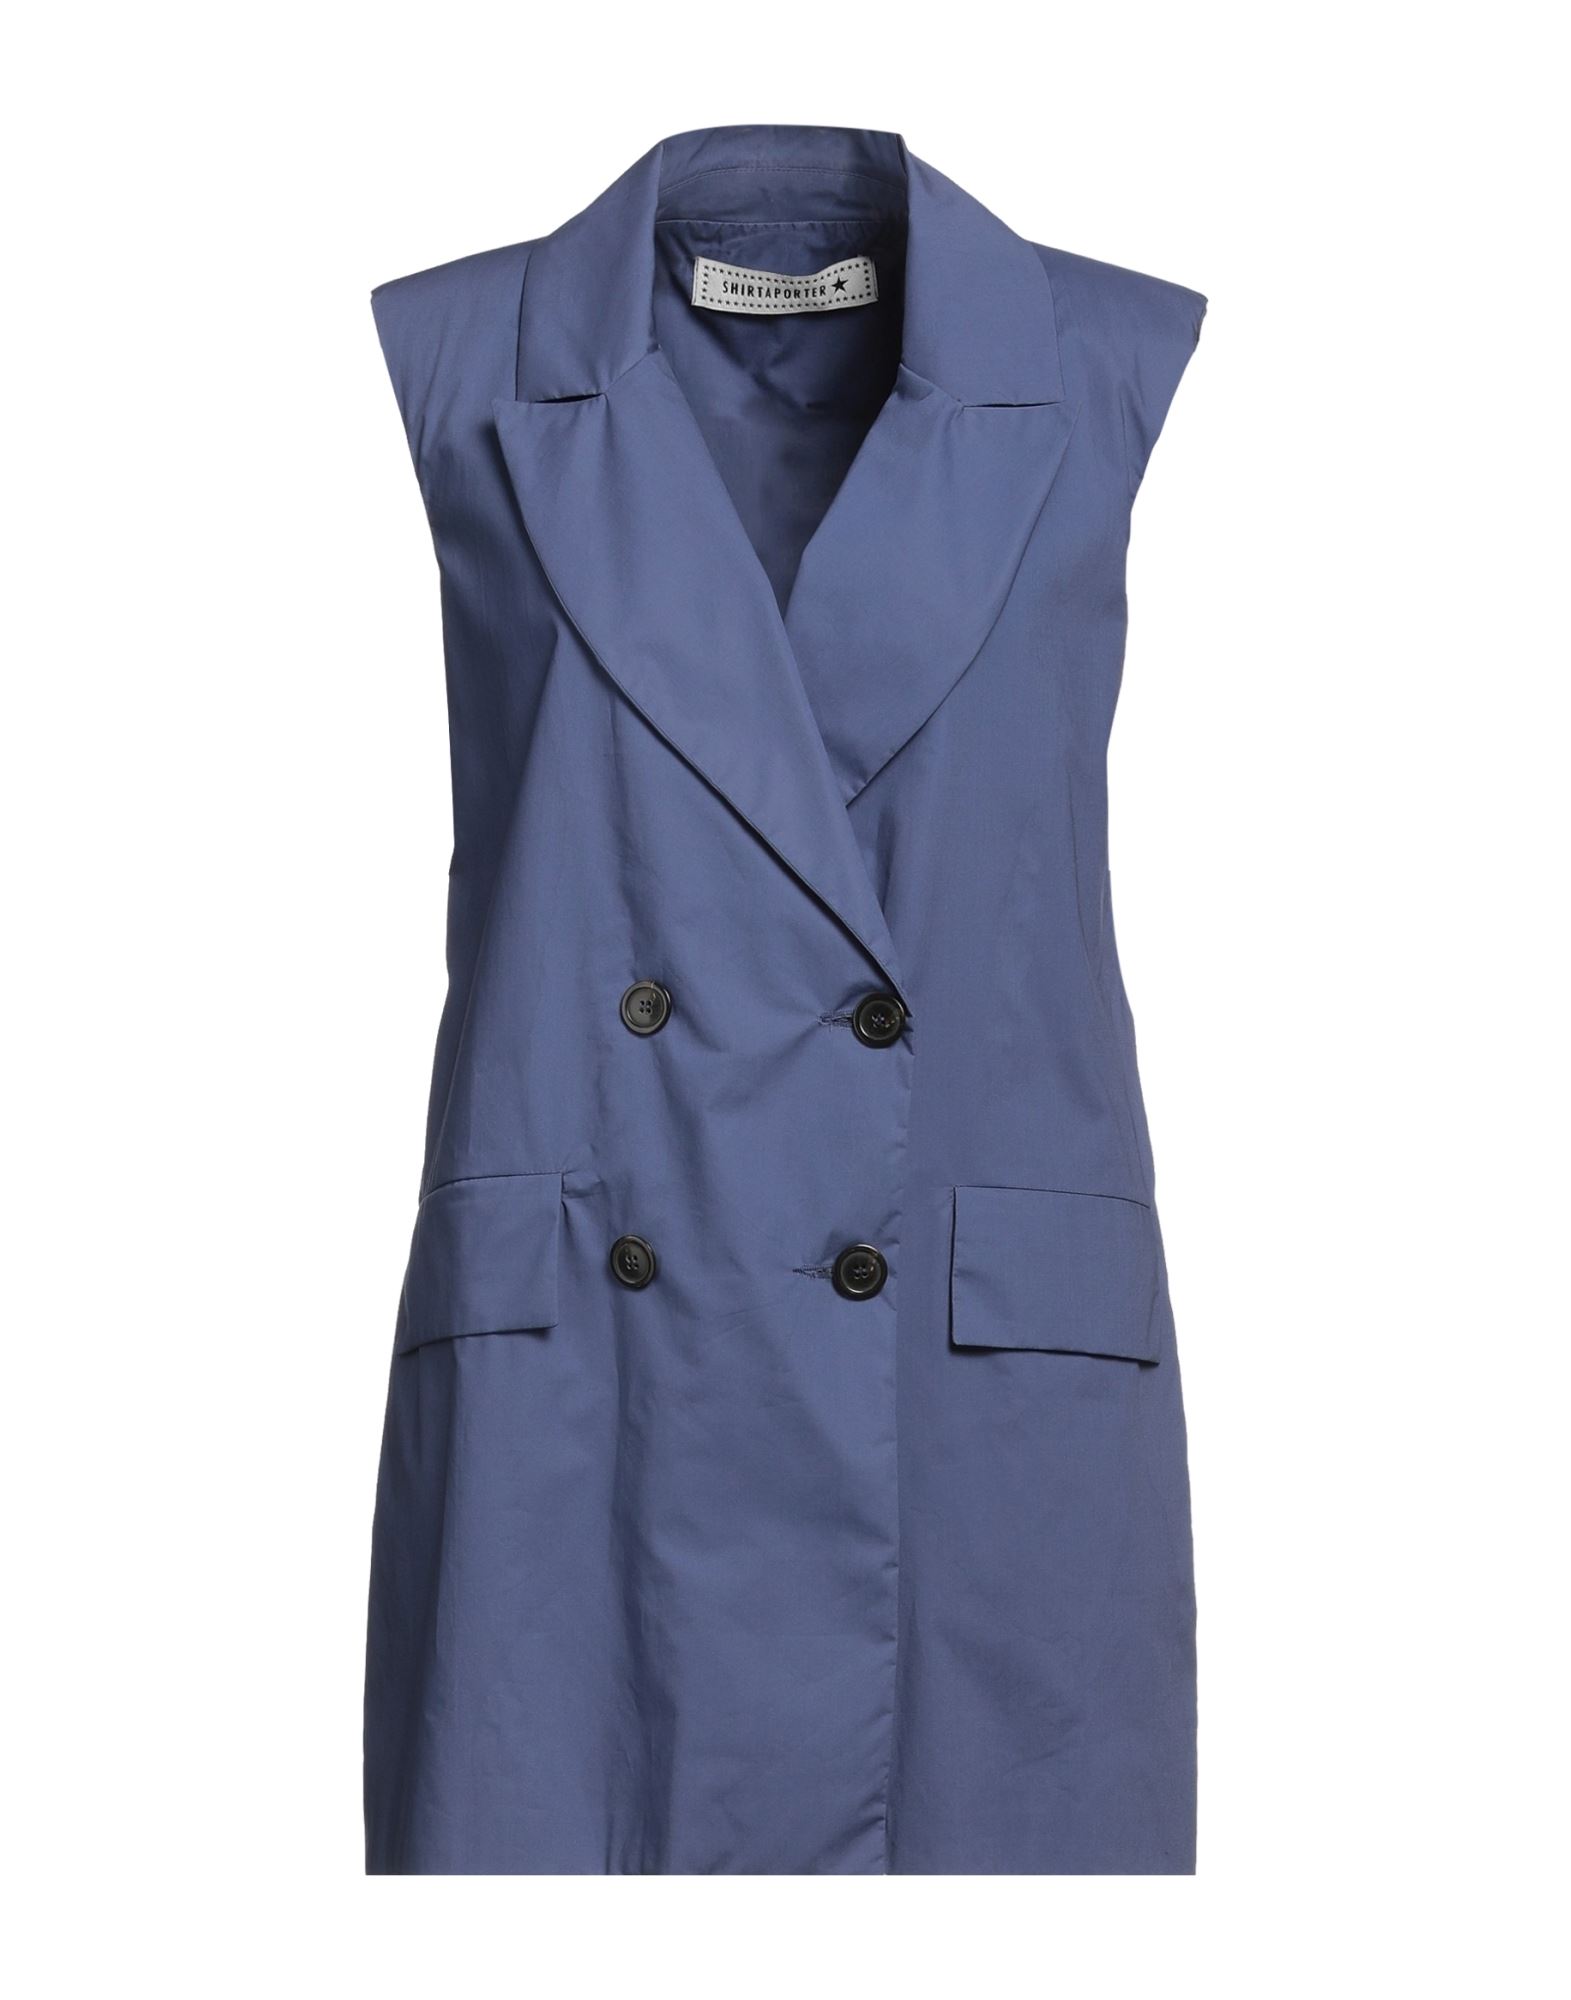 Shirtaporter Suit Jackets In Blue